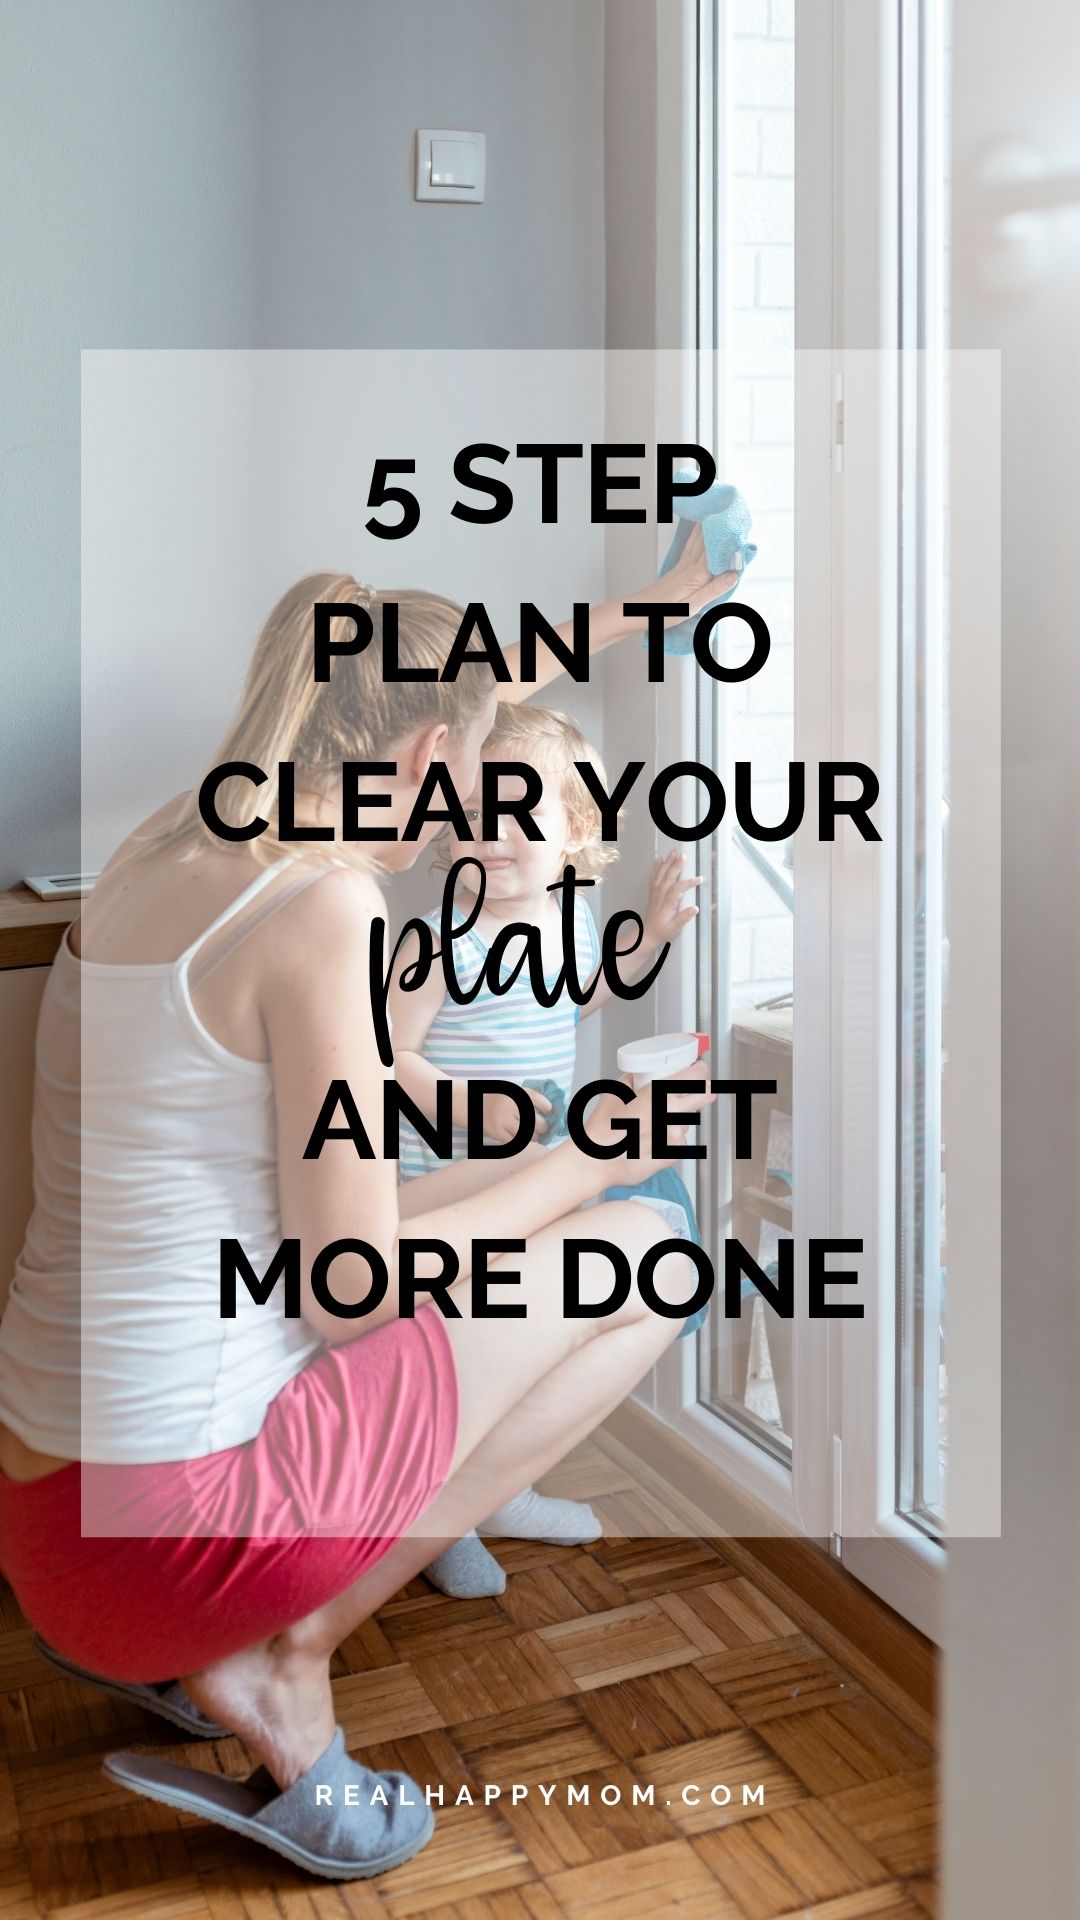 A 5 Step Plan to Clear Your Plate and Get More Done